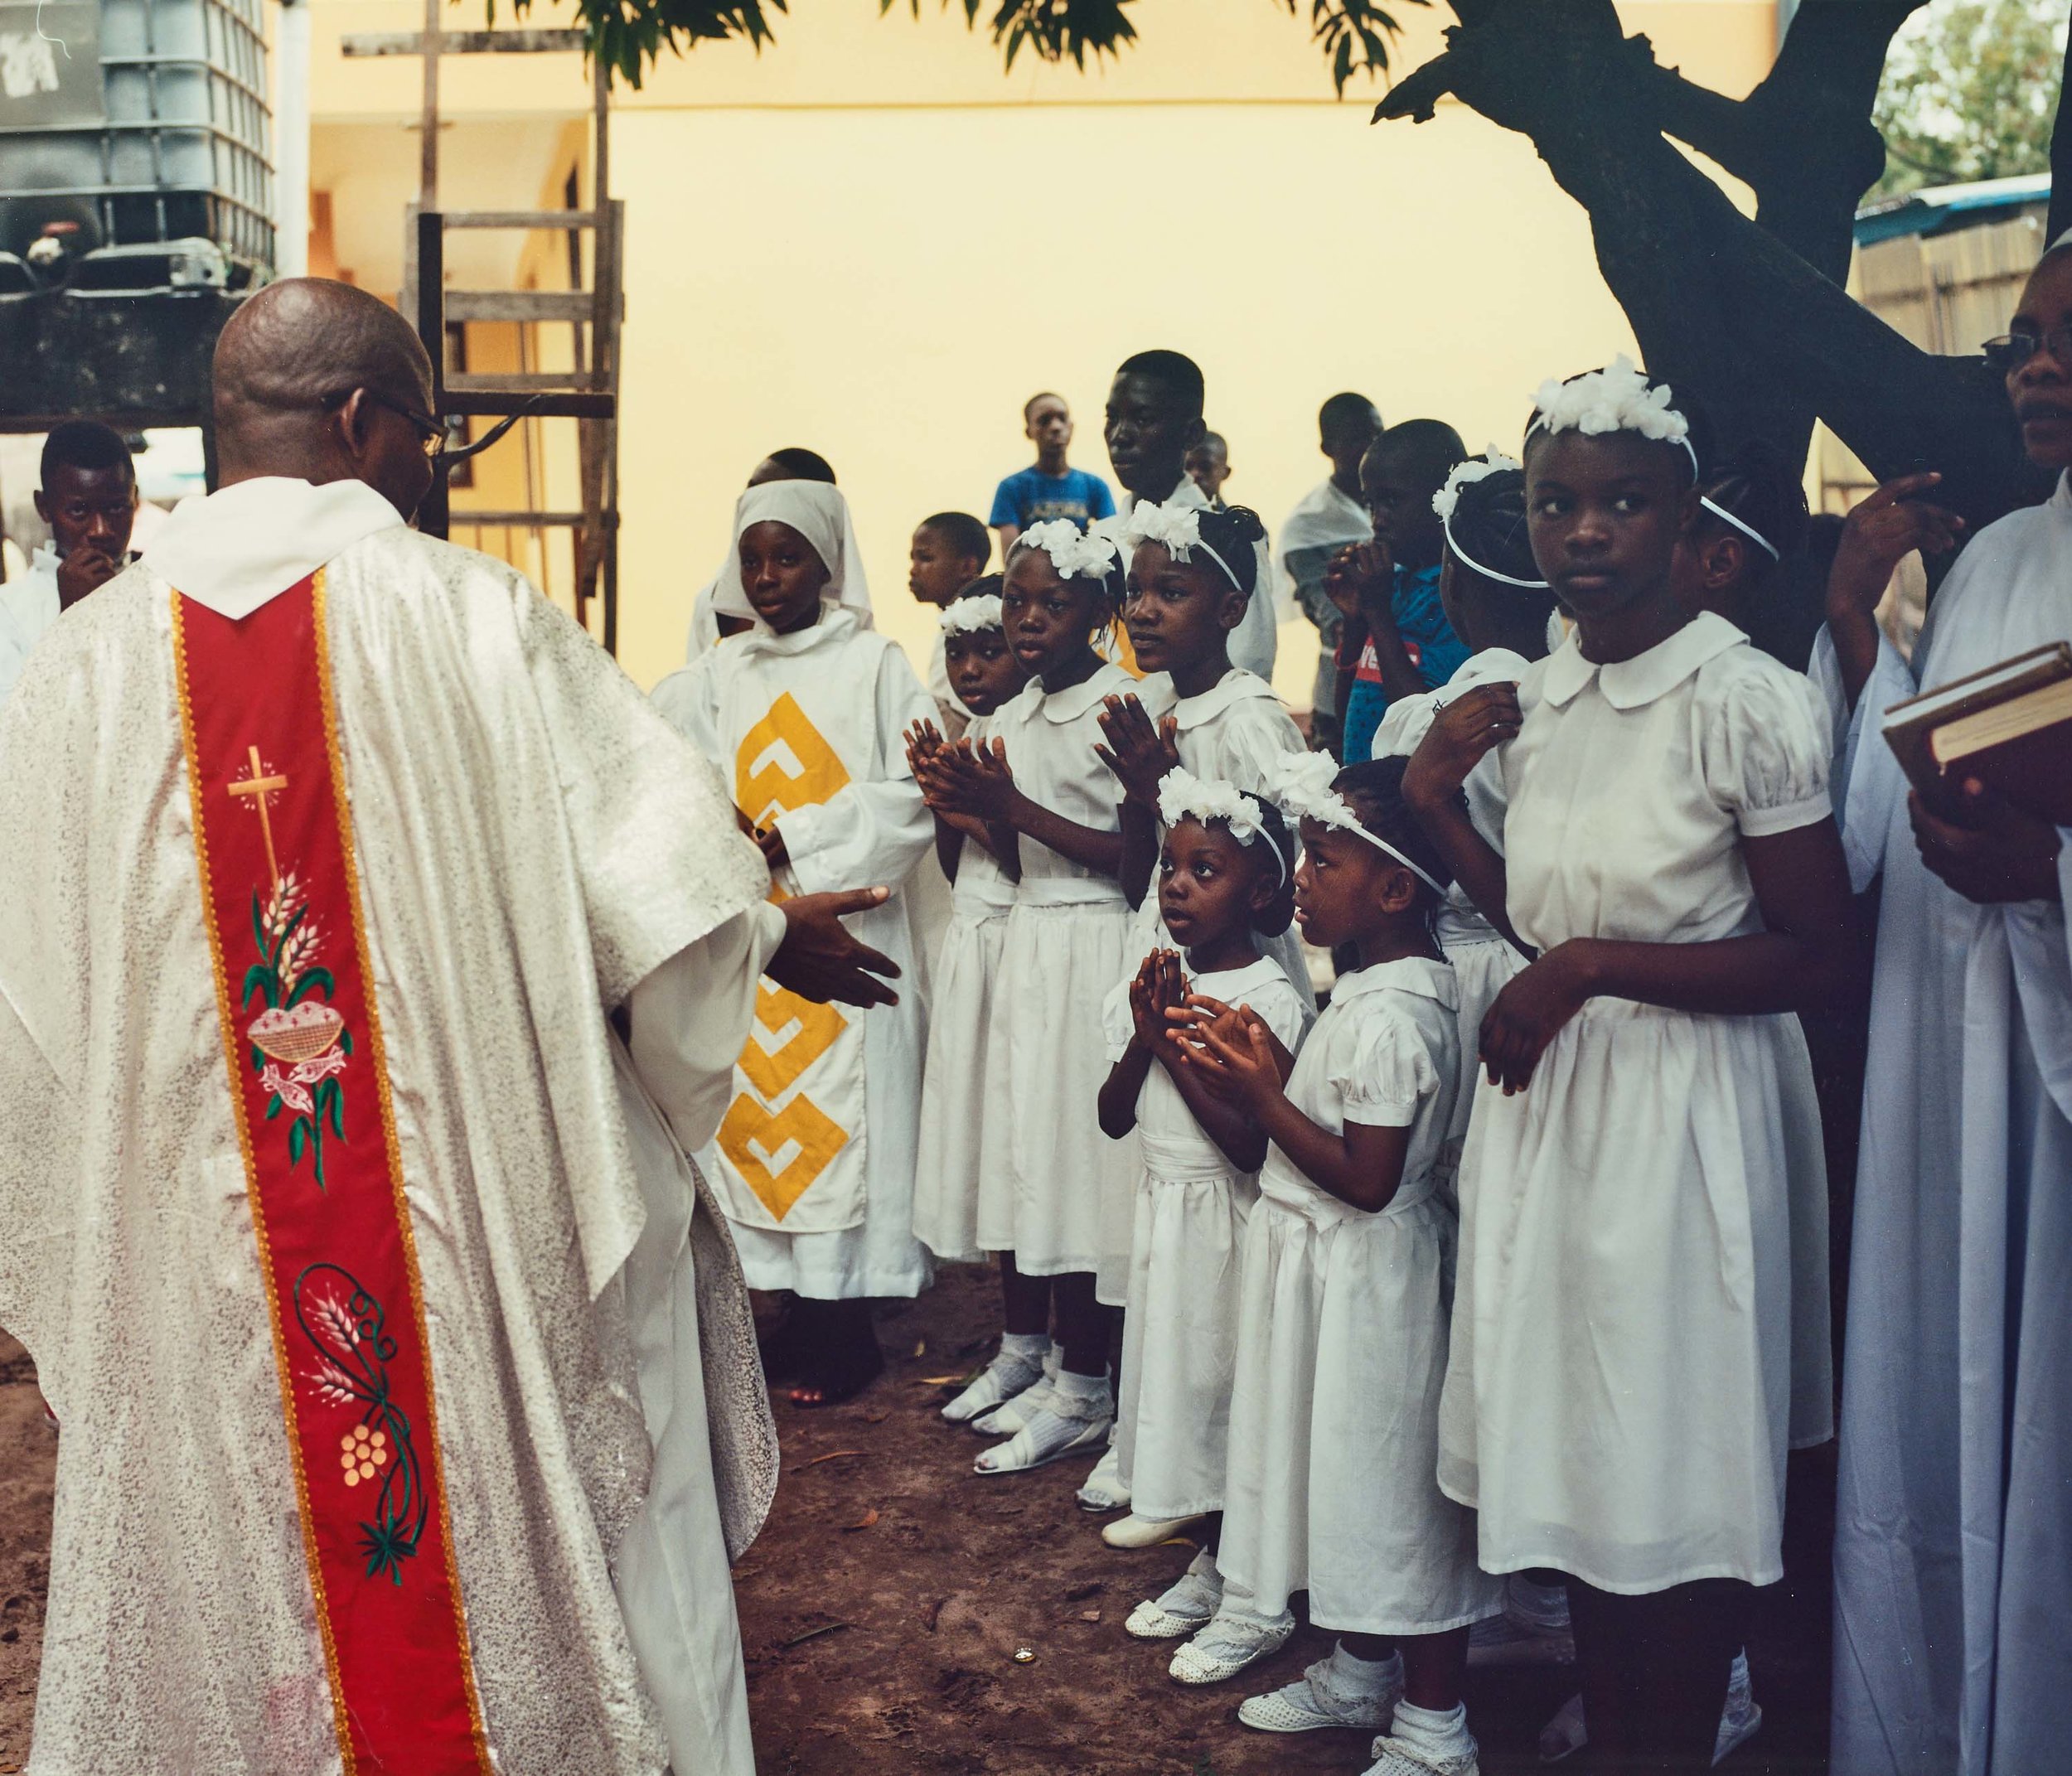  Alarmed at the dire condition of life for their congregations, the priests of Congo have attempted to broker elections with the brutal regime. Many look to them and the rituals of the Church for guidance and assurance as Congo approaches a tipping p